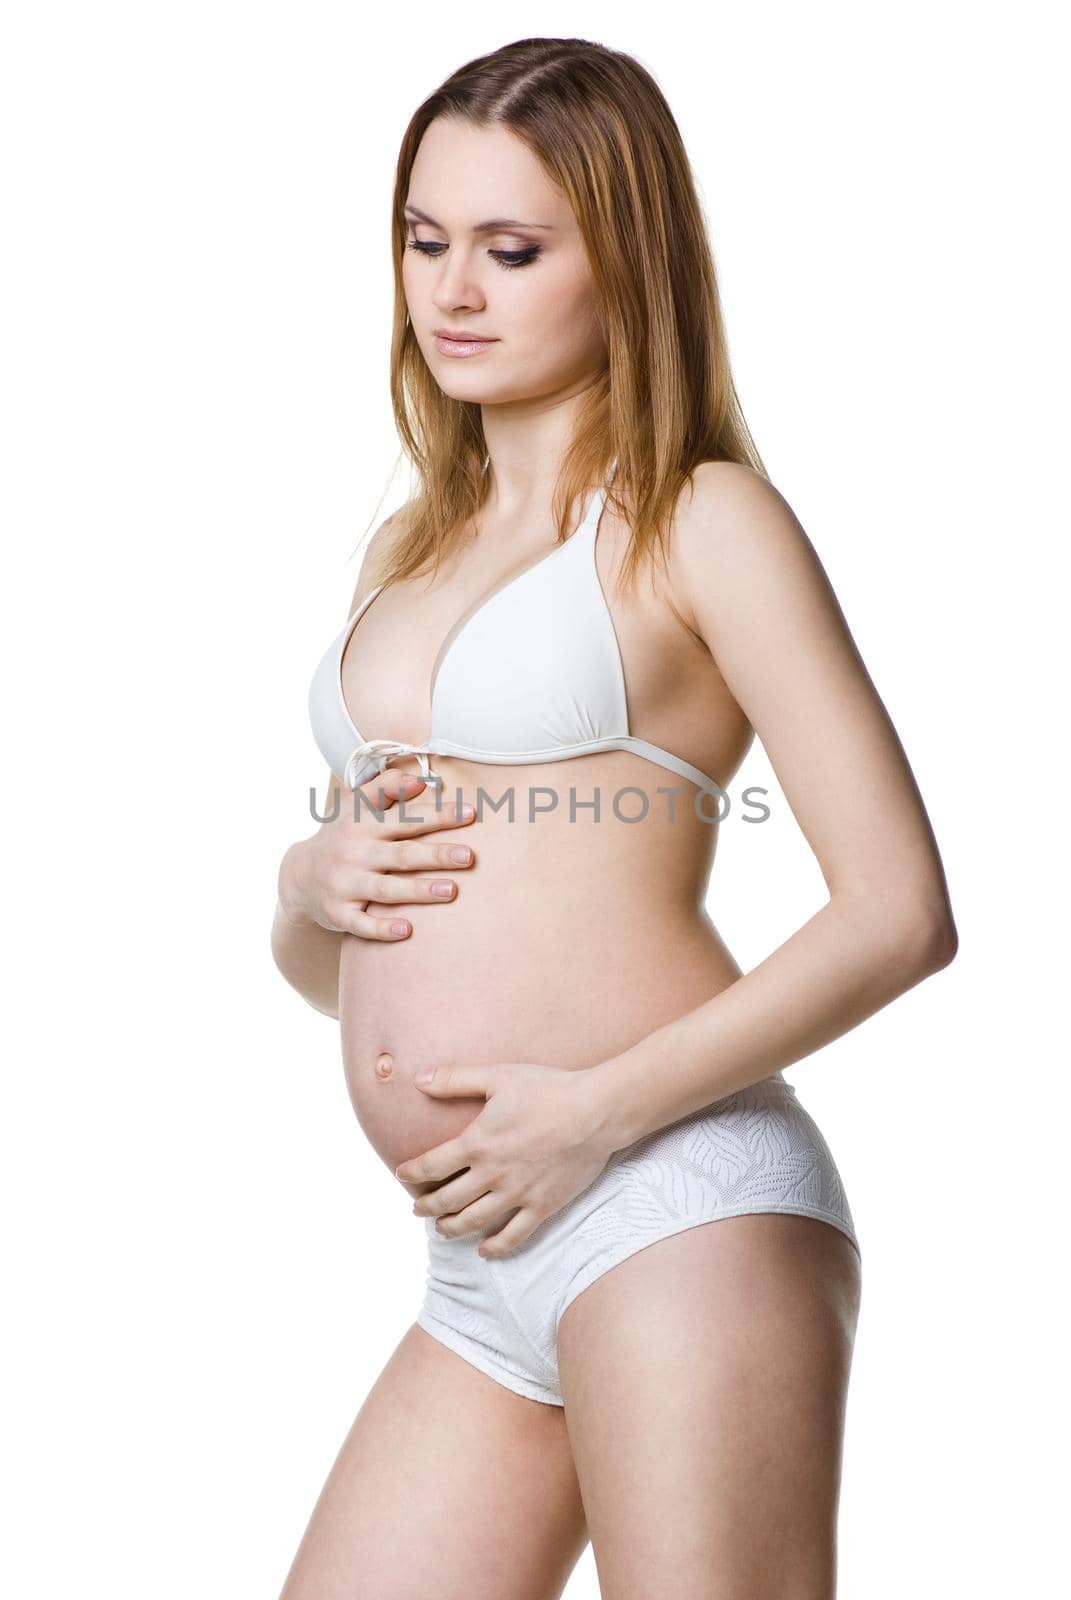 portrait of the beautiful pregnant woman posing isolated on white